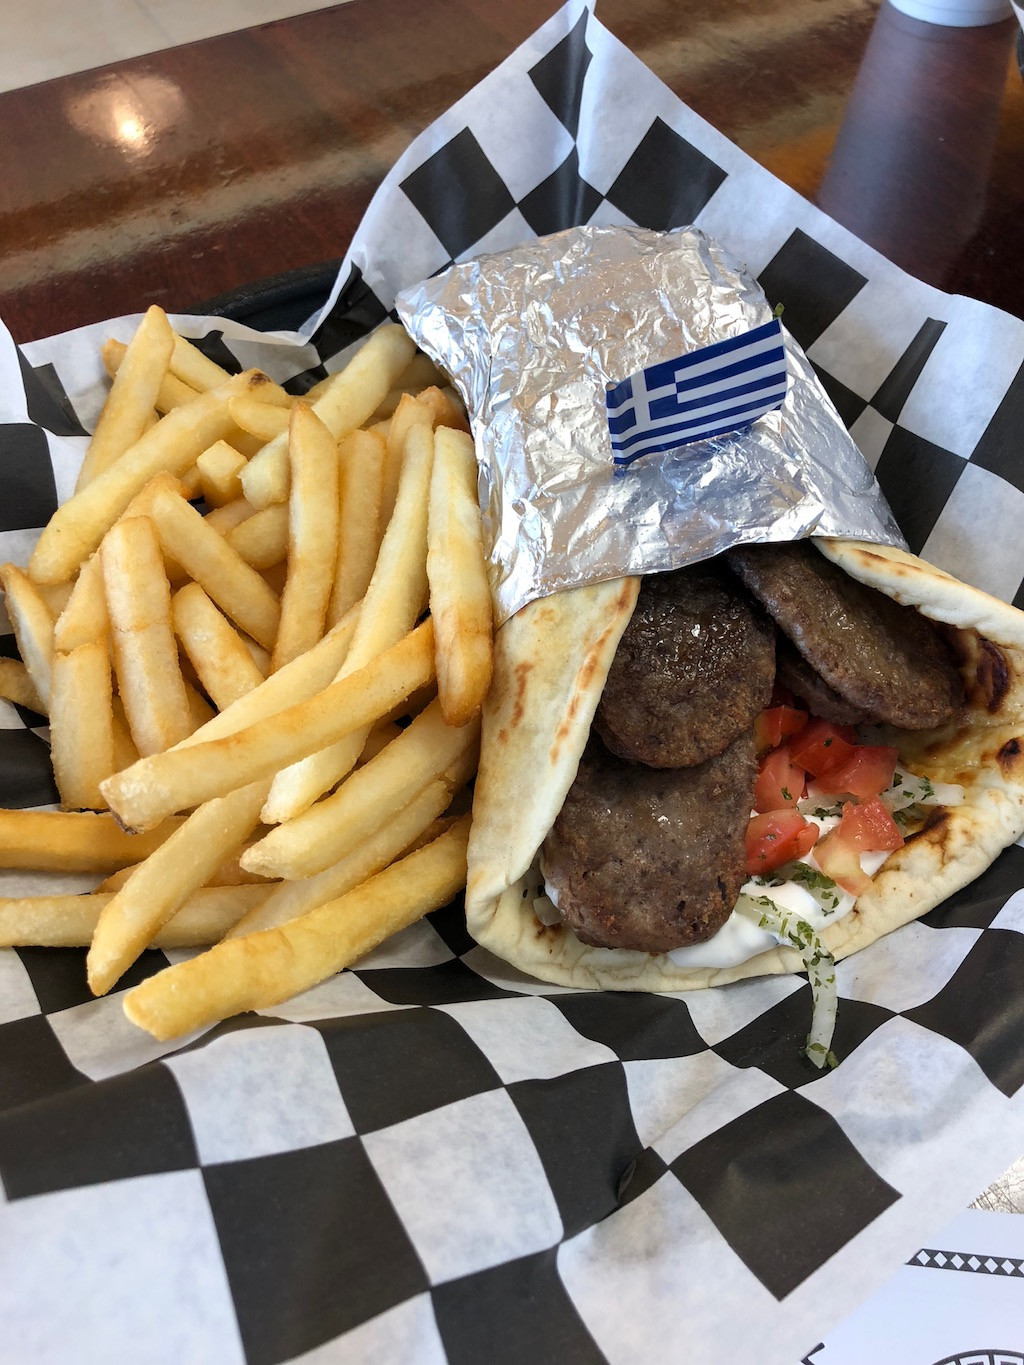 Anf Gyros Winter Haven Fl
 Krazy Greek Express Opens In Downtown Winter Haven